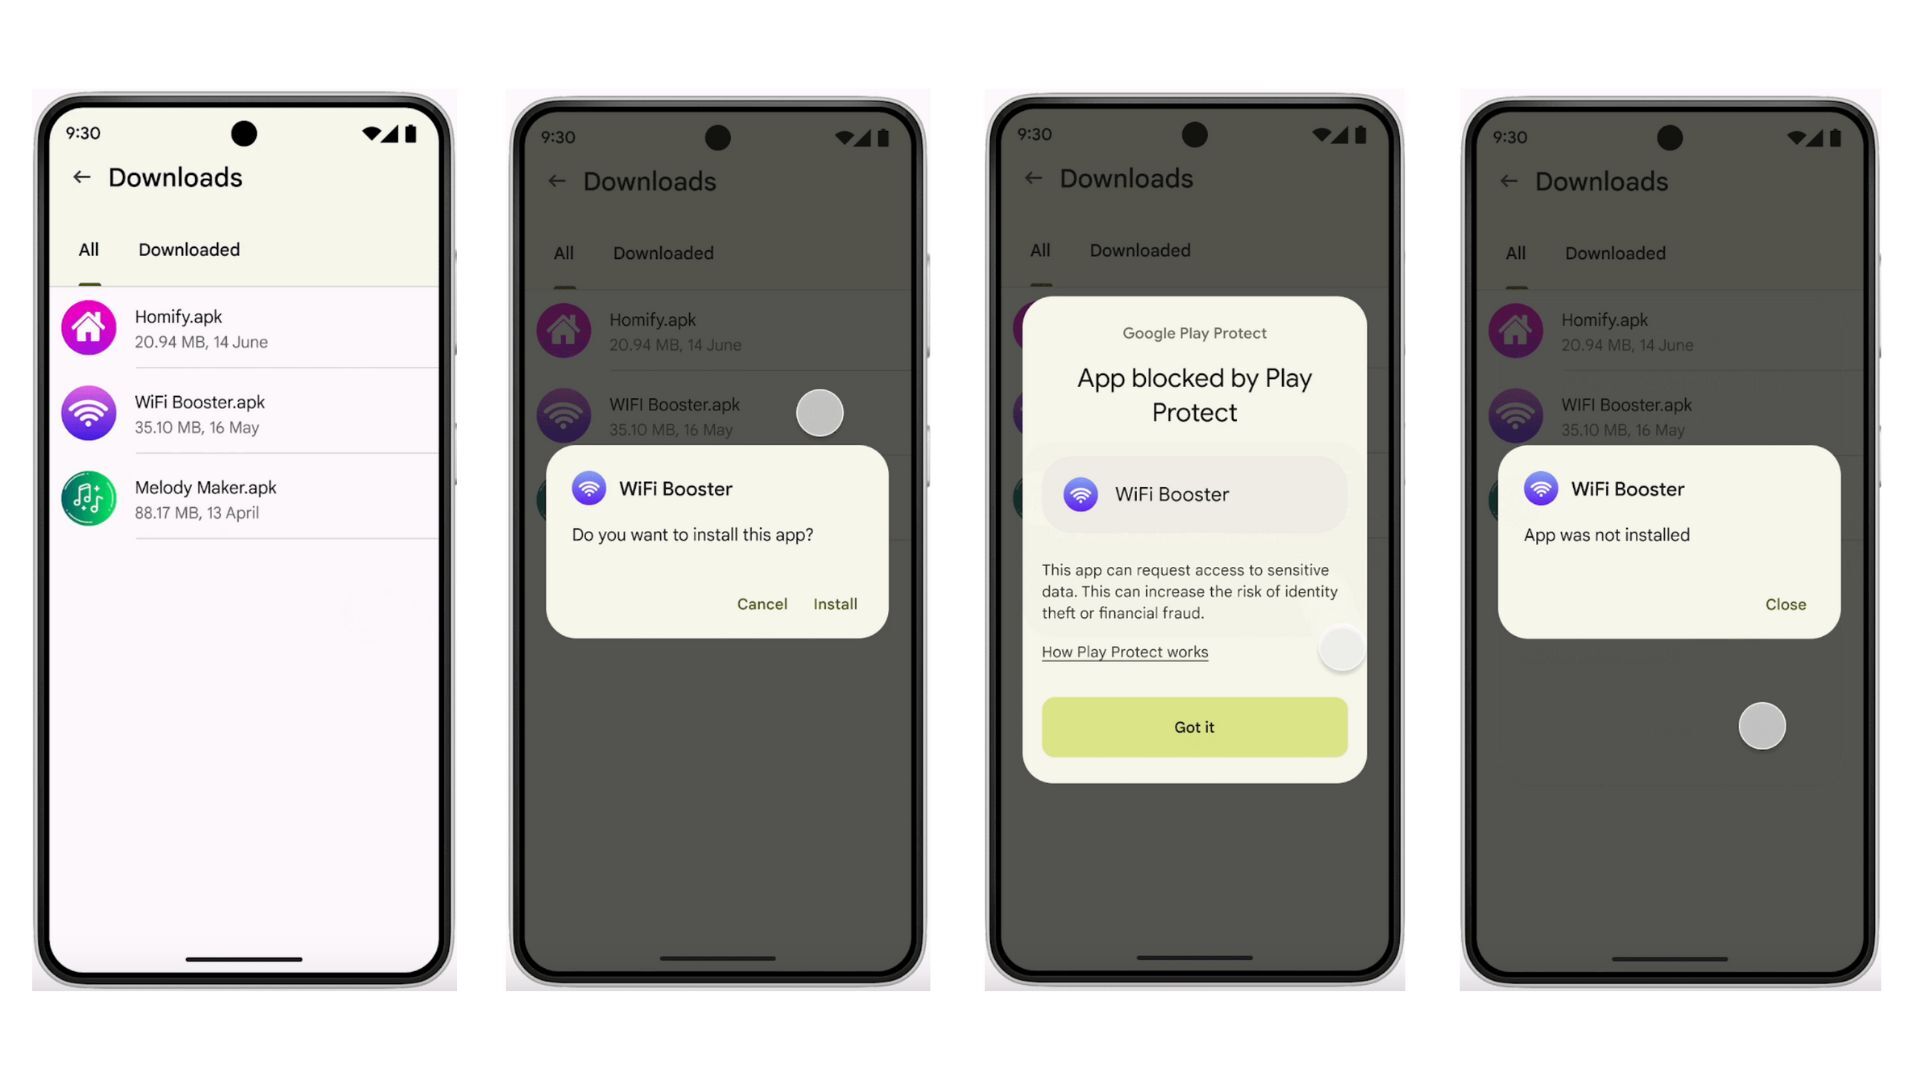 Screenshots showing the feature in action (Image credit–Google) – Google is testing real-time app scanning to protect Android users from financial fraud